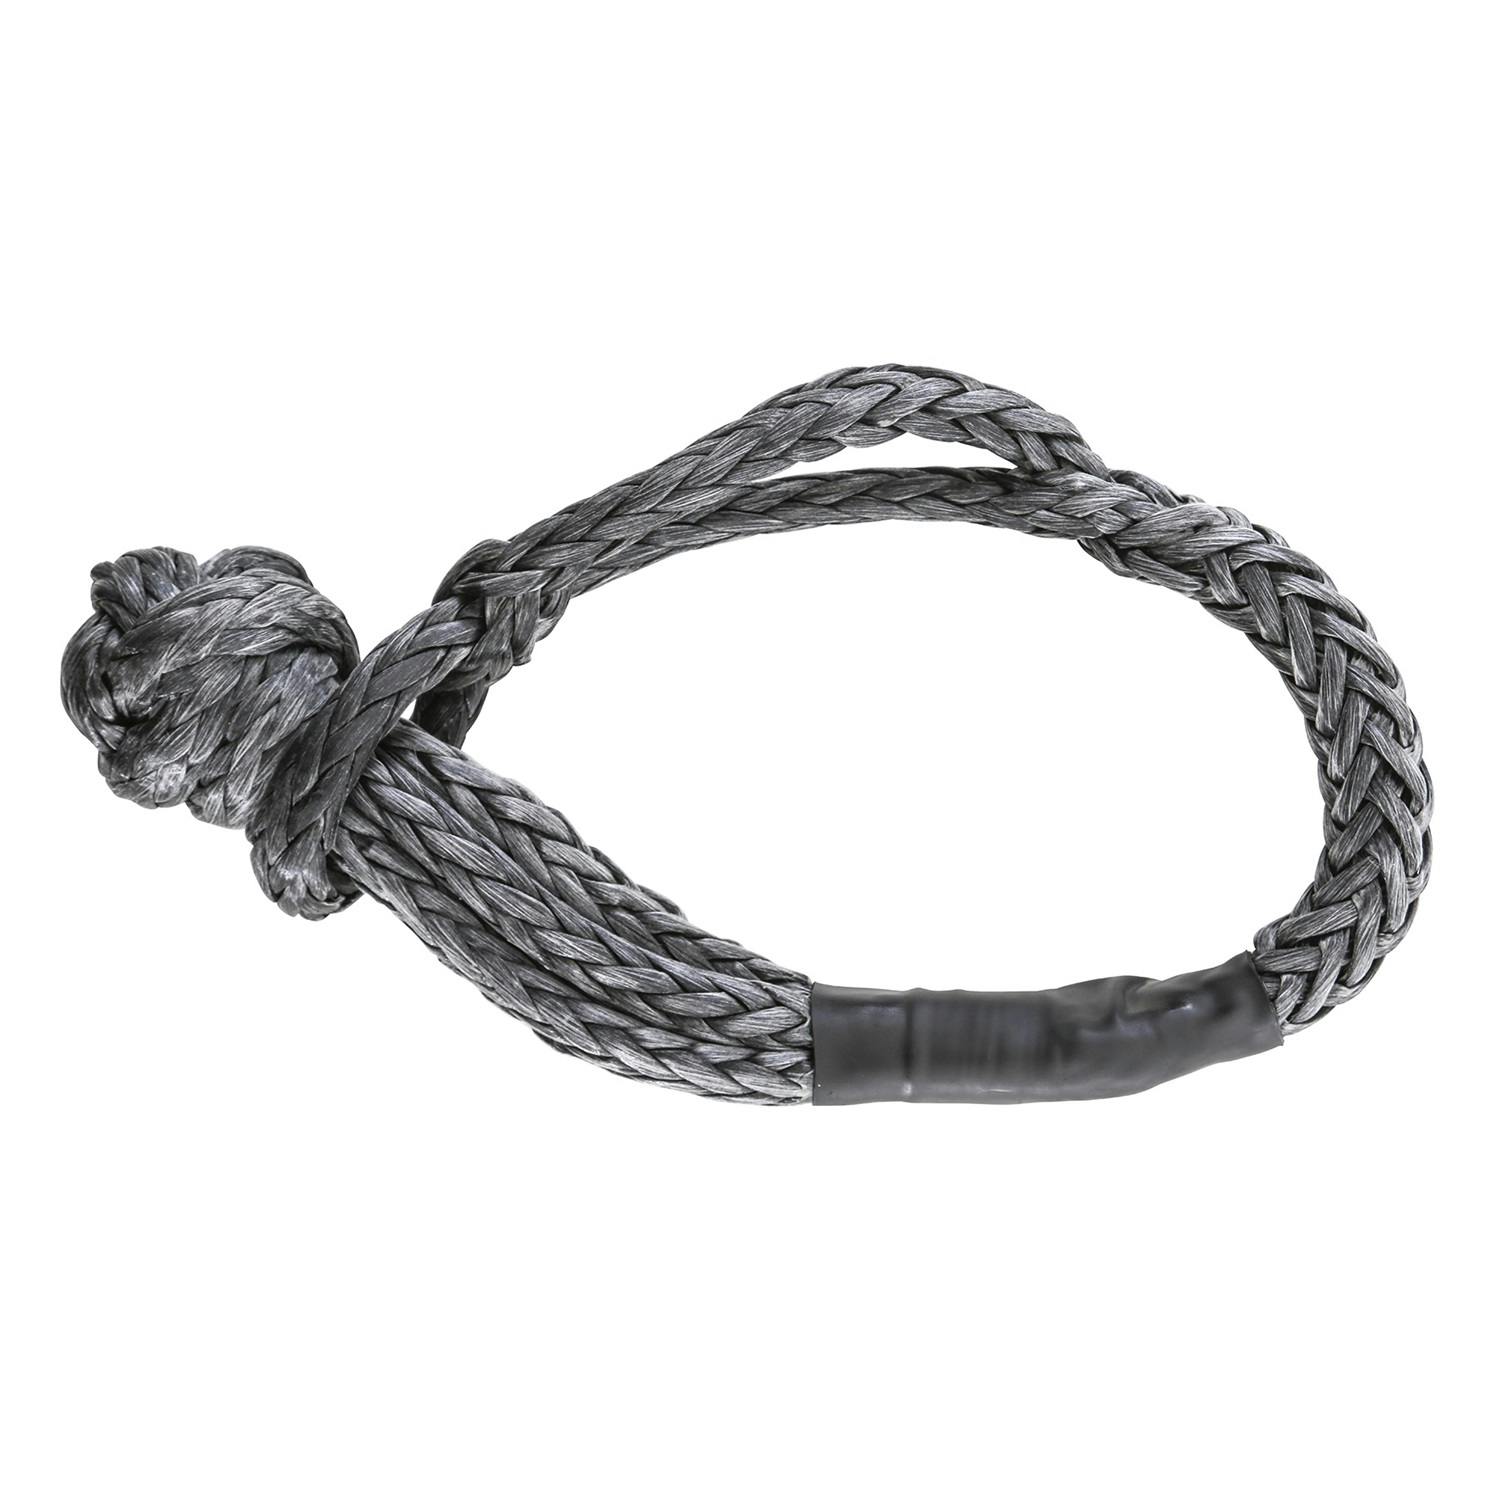 Smittybilt 13051-B Soft Shackle Rope 7/16 in Soft Shackle Rope X 6 in 